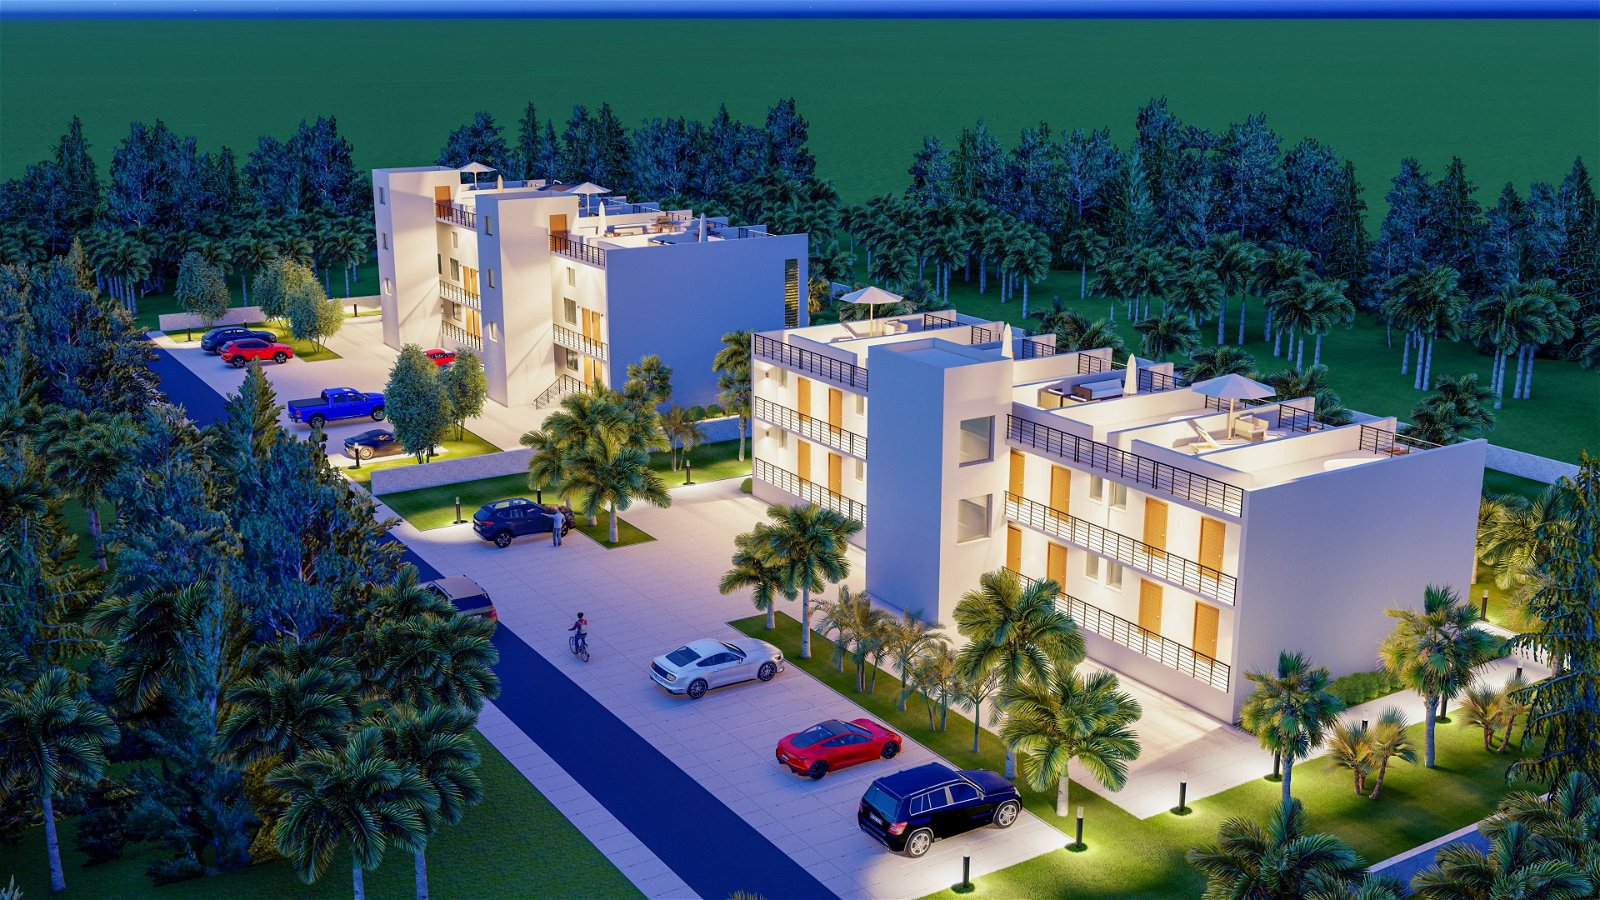 For Sale  Apartments    Studio,  1+1, 2+1, 3+1 in Esentepe Northern Cyprus-d2c96bad-17a9-4f59-bcda-6fe41fe97e43